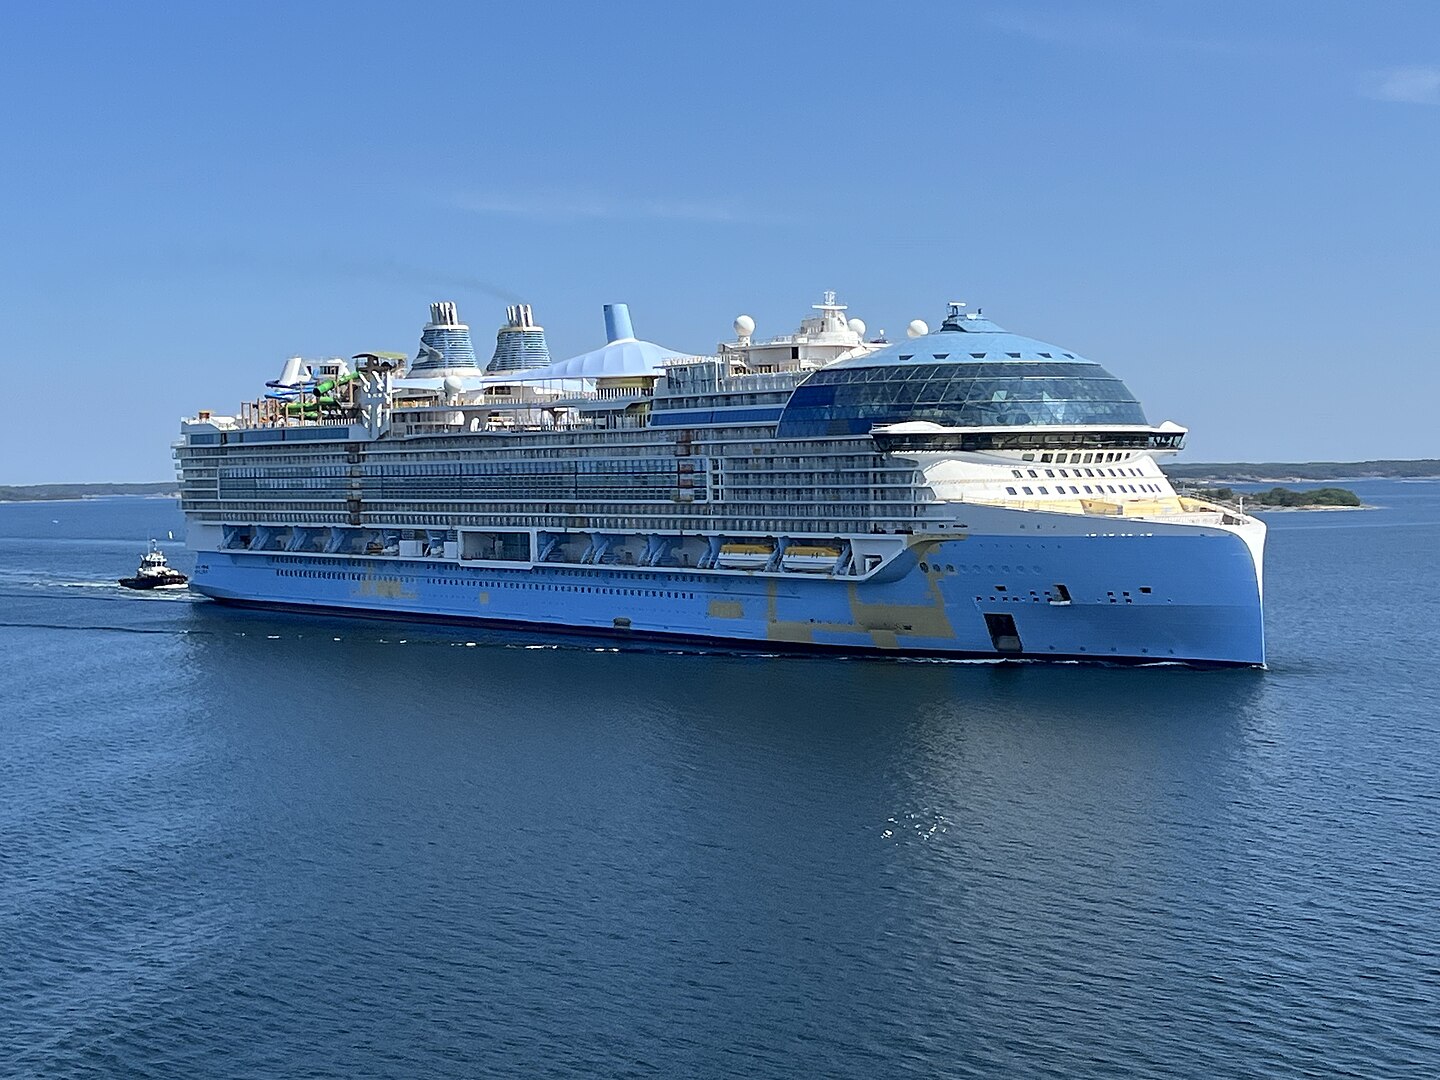 <p>The Icon of the Seas has 20 decks, 18 of which are solely dedicated to guests. There are over 2,800 different rooms of varying sizes and can accommodate a total of 5,610 guests (not including staff).</p>